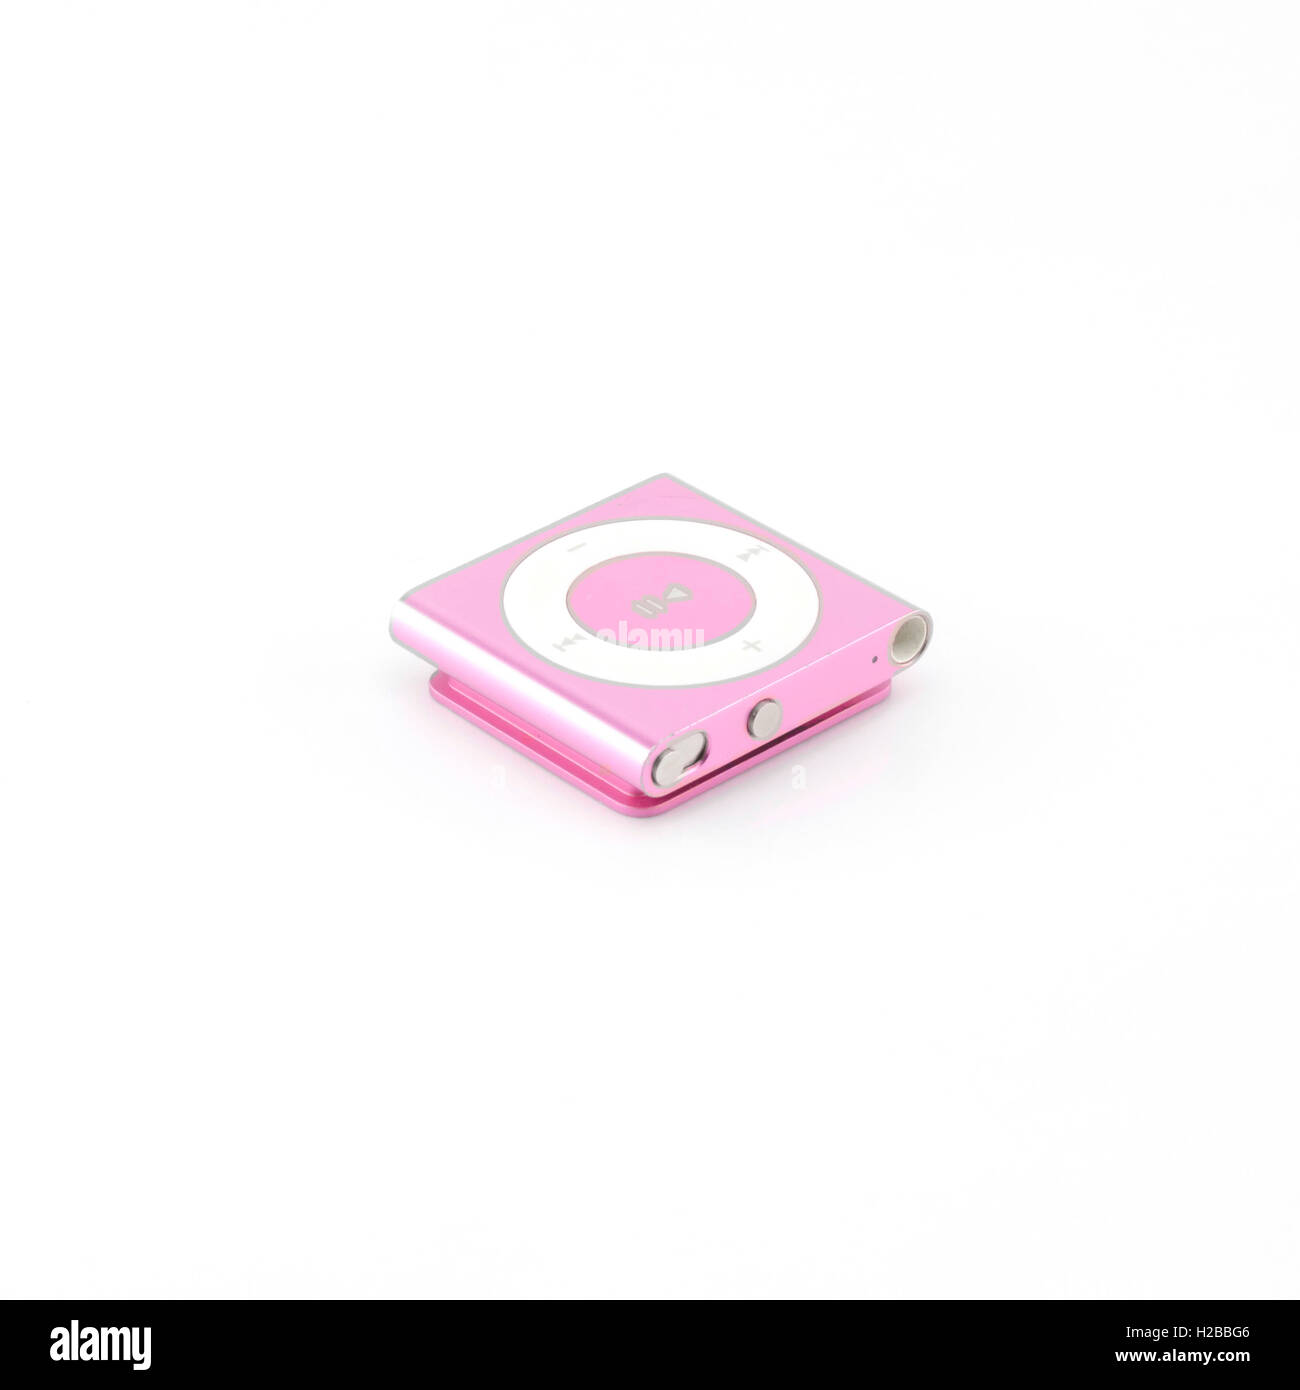 pink mp3 player isolated on white Stock Photo - Alamy